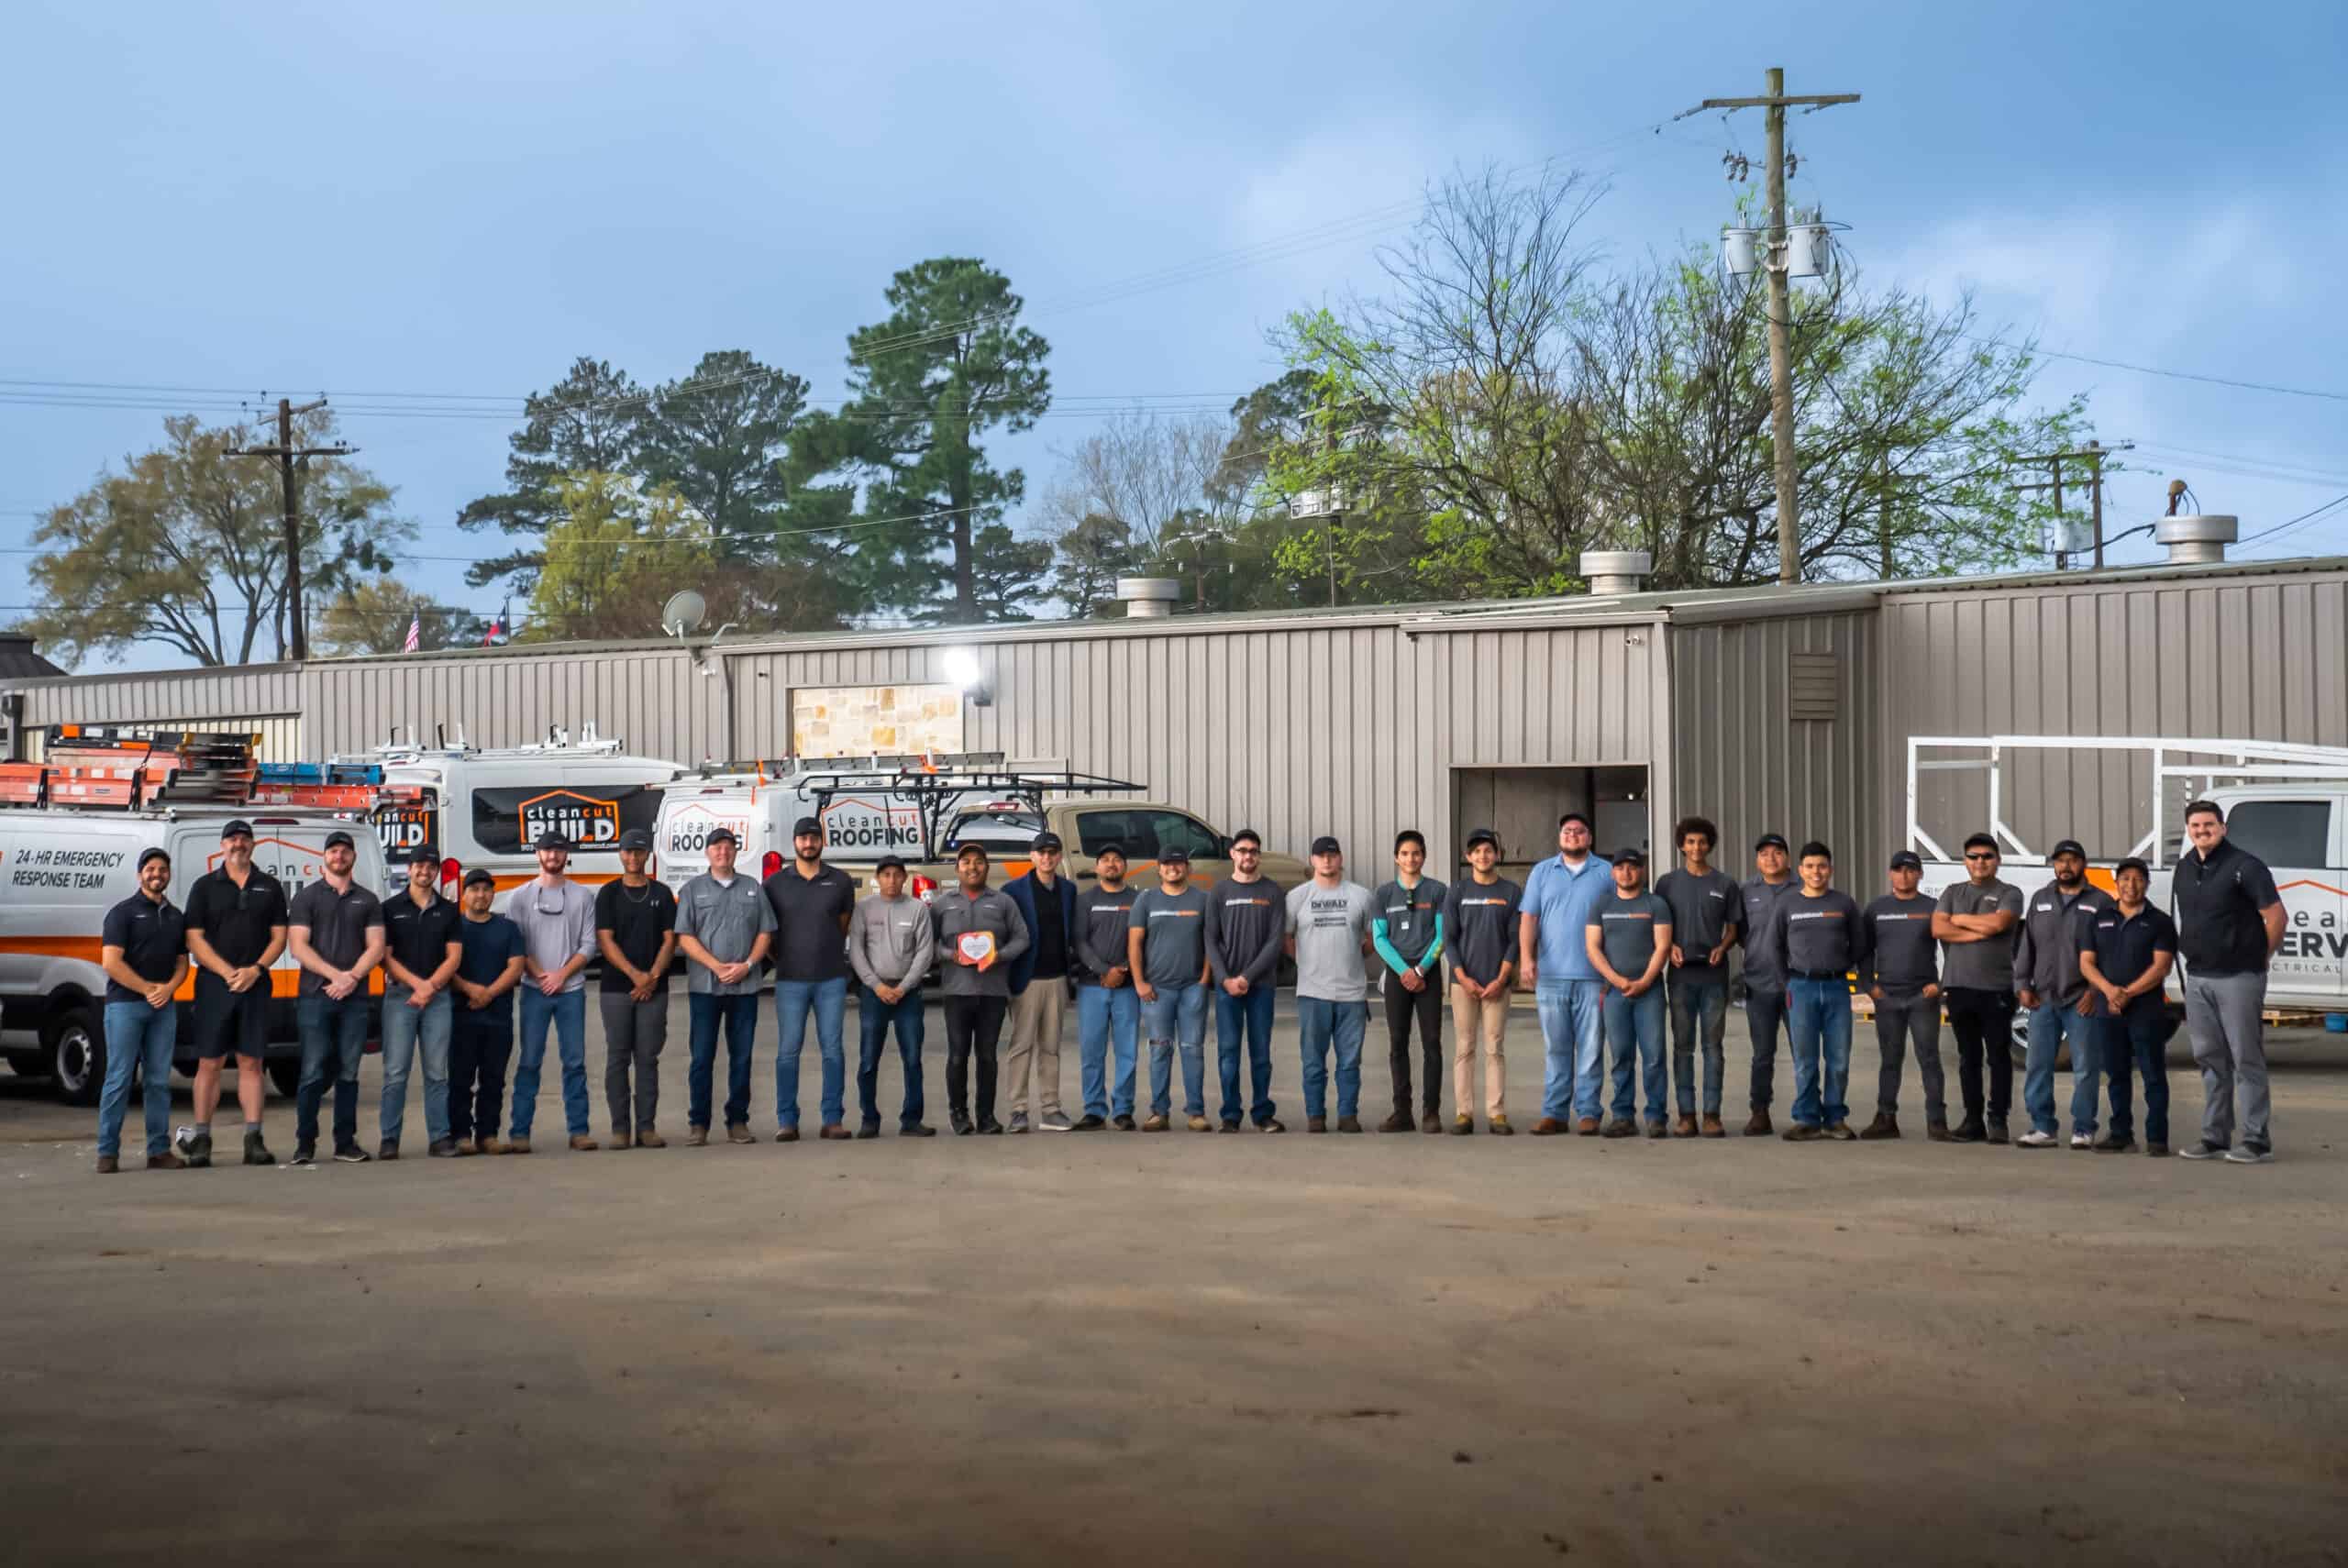 This image shows the Clean Cut staff standing for a photo outside